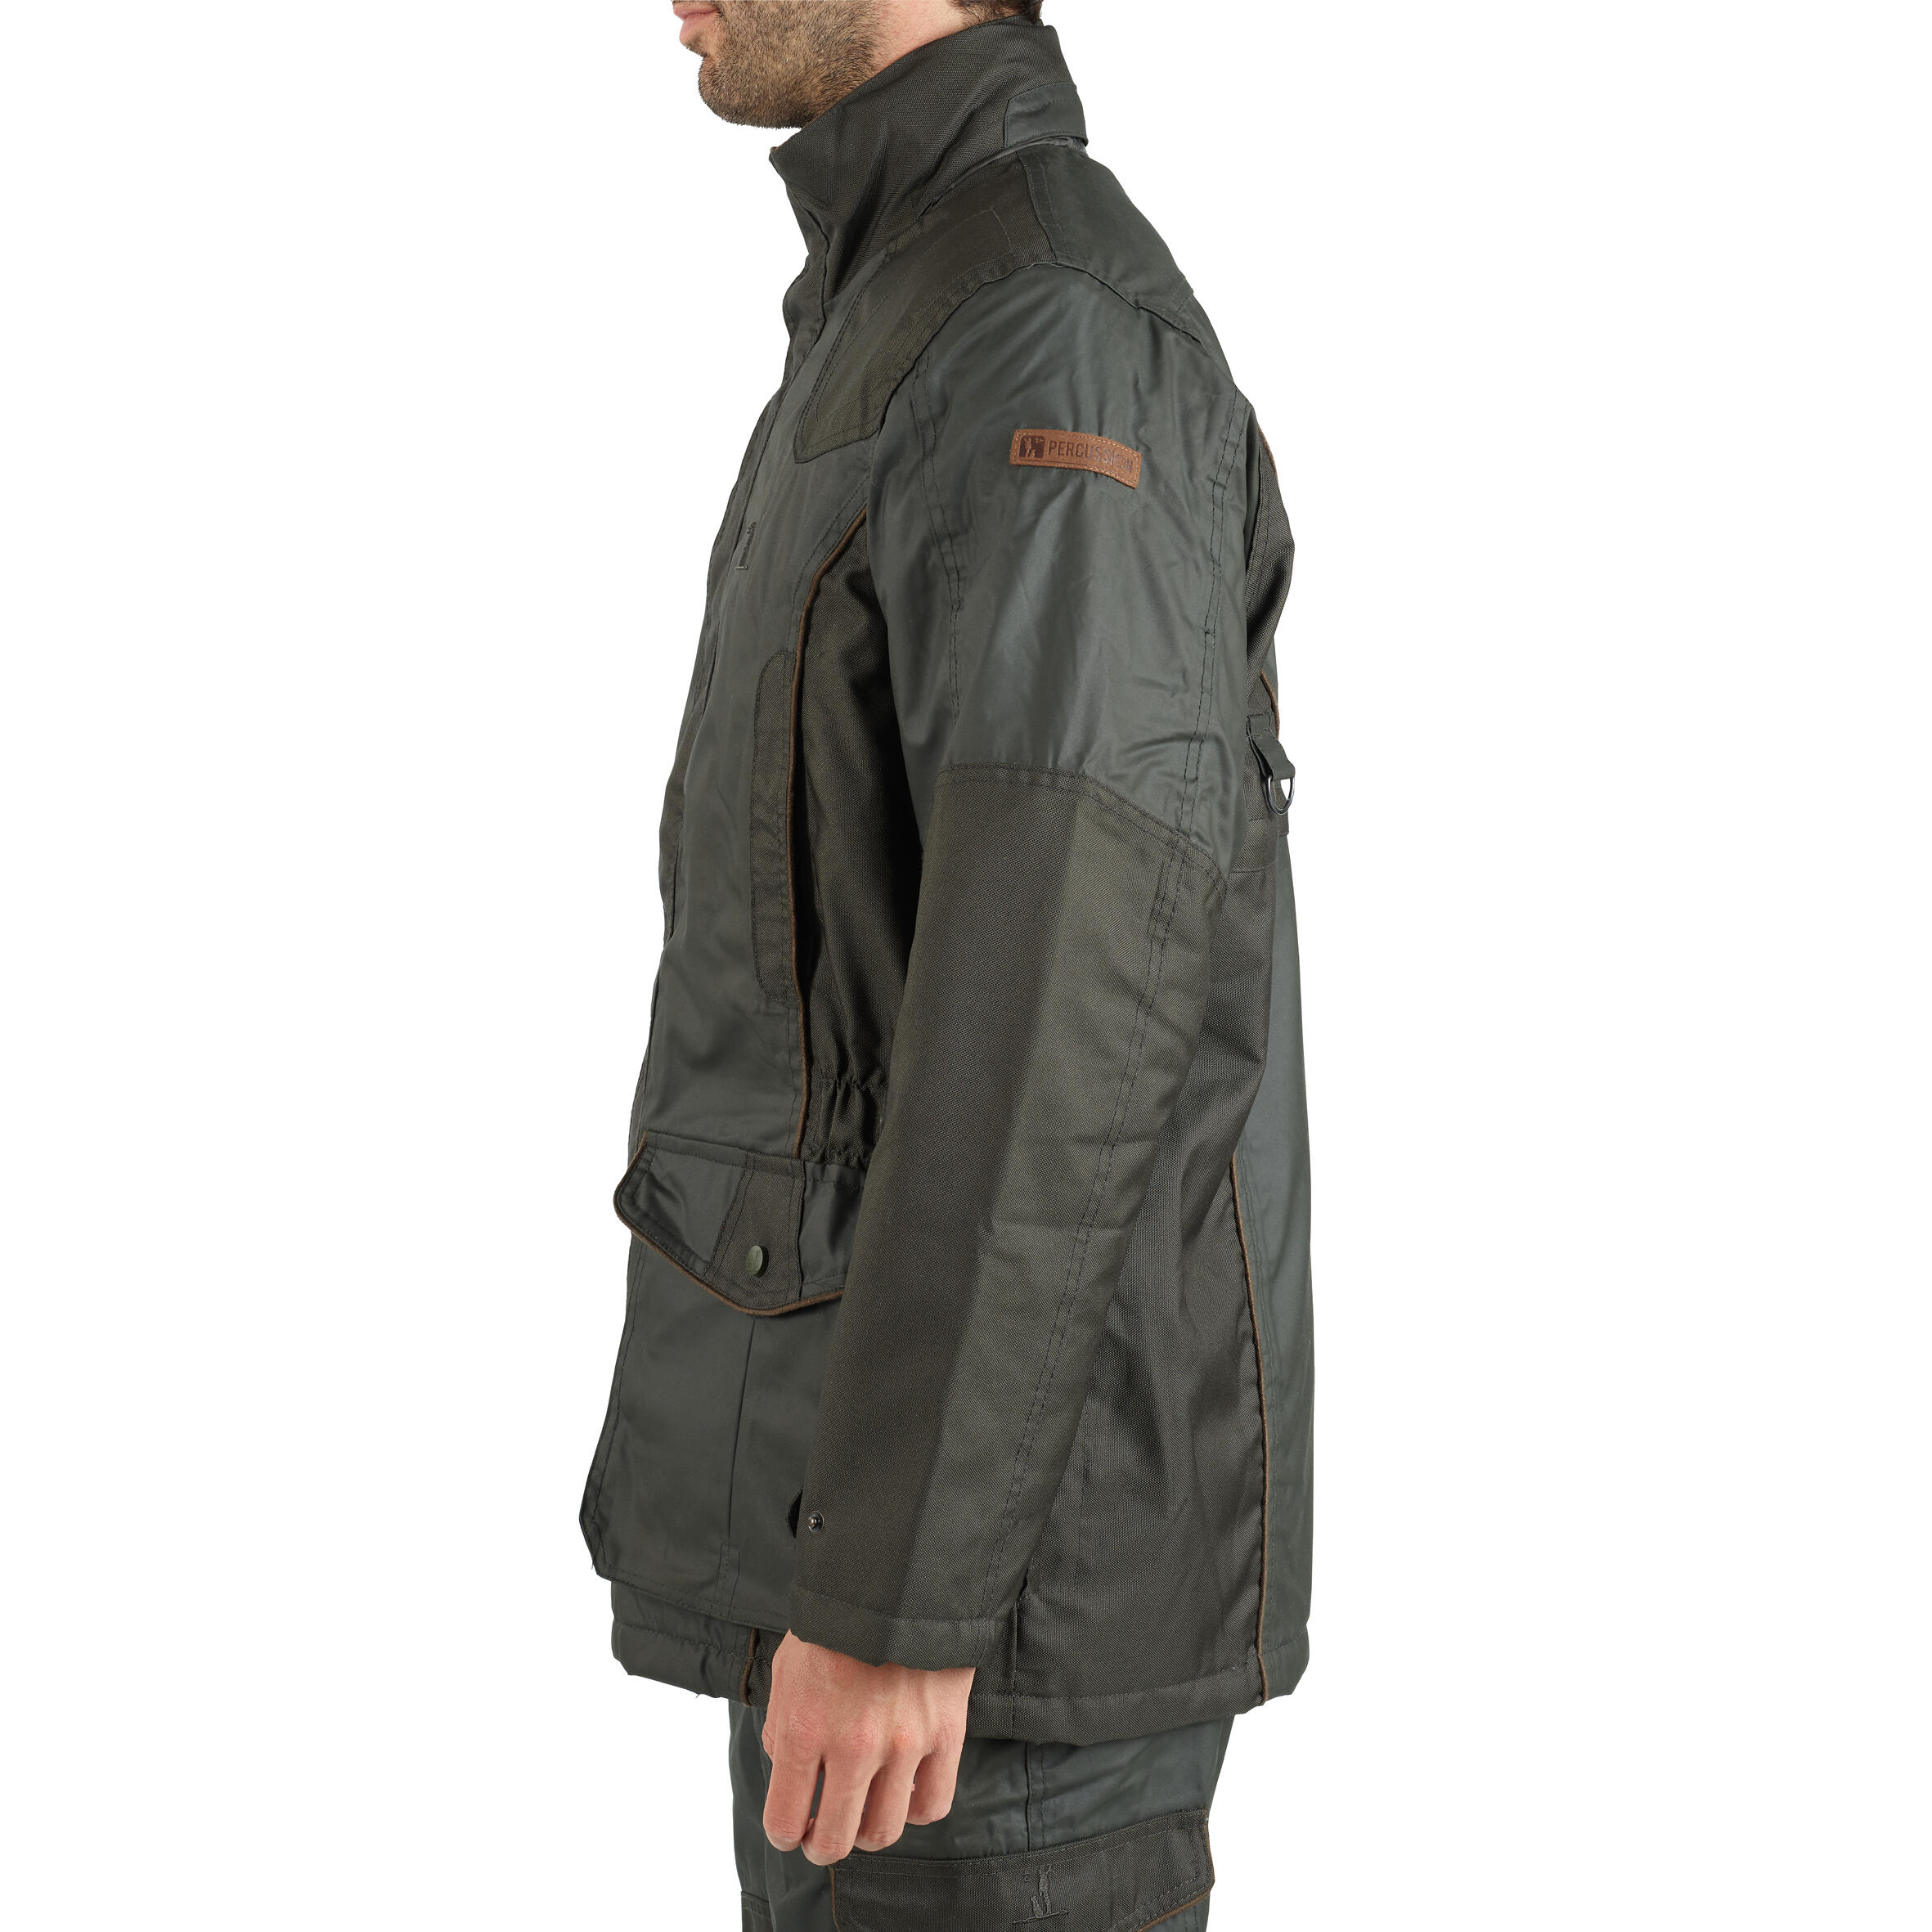 Hunting waterproof robust jacket Percussion Impertane - Green 5/13